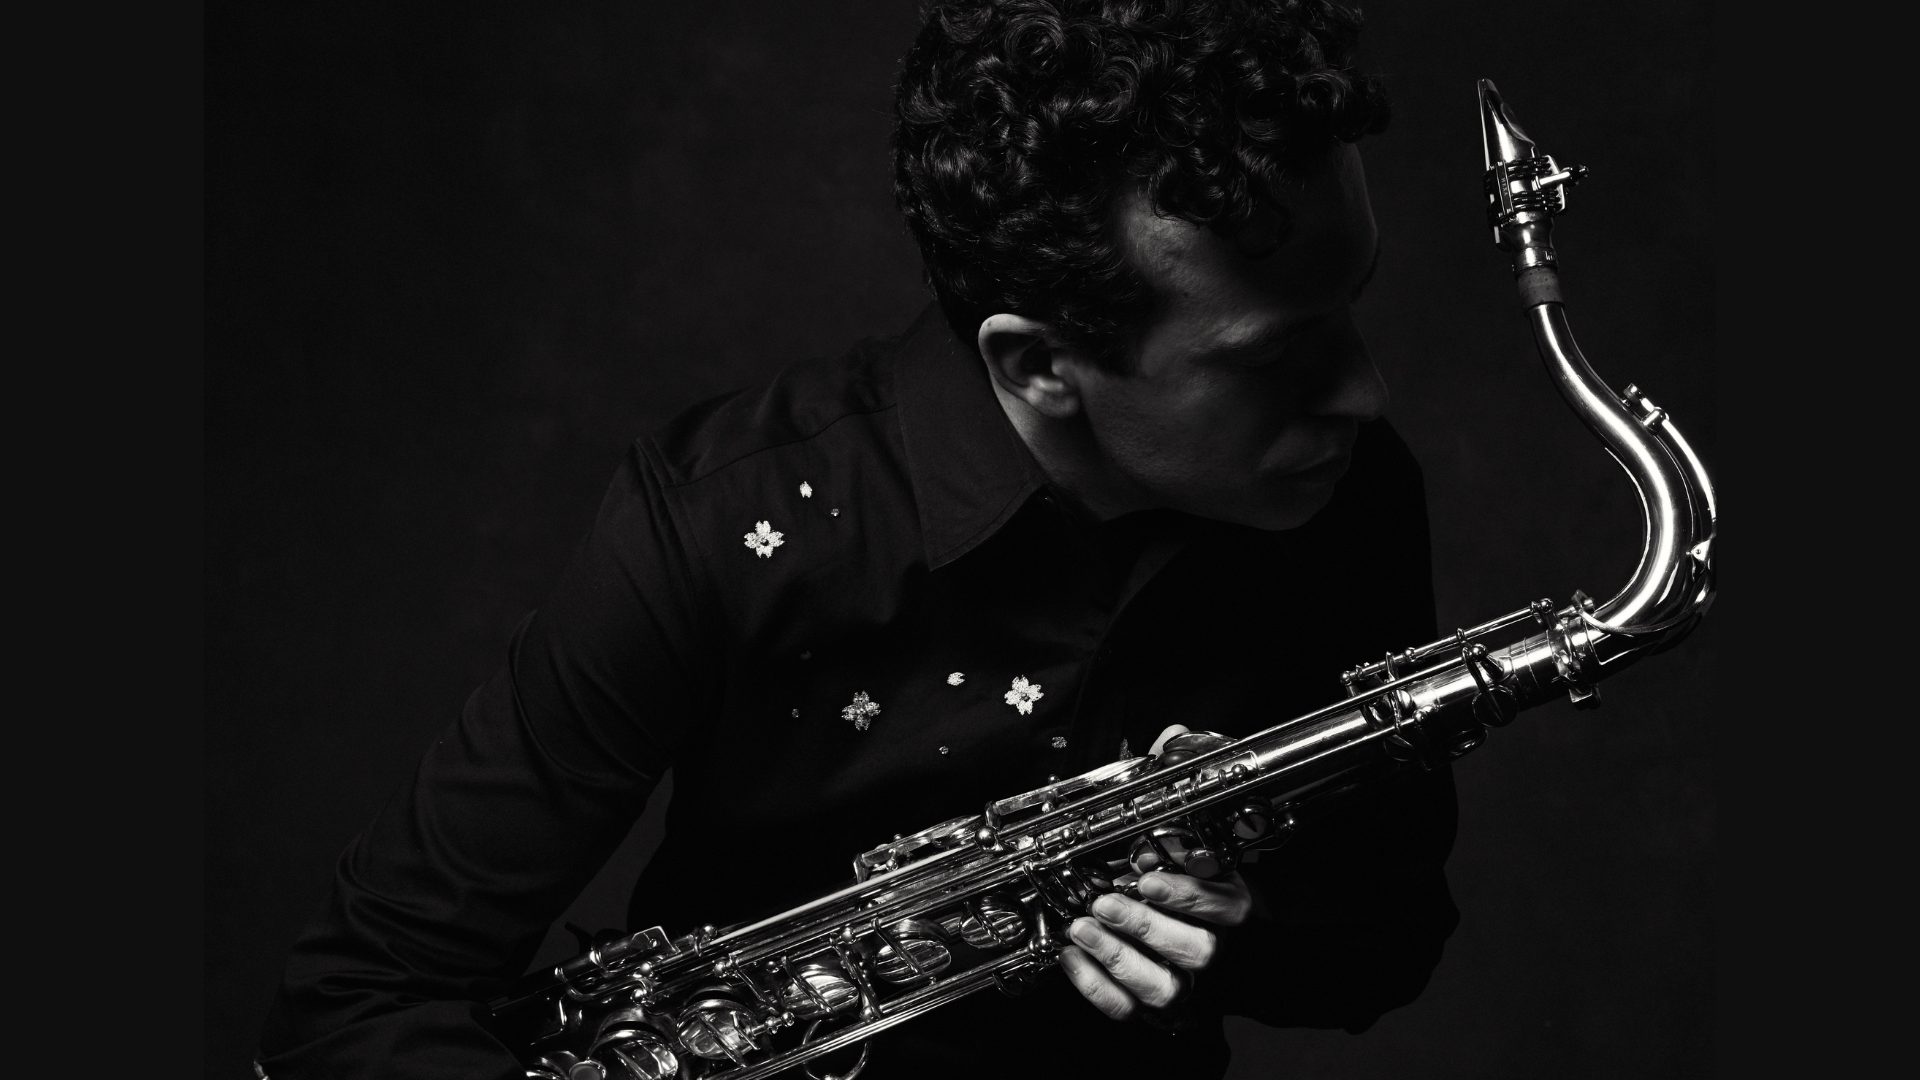 Saxophonist Oded Tzur joins Vienna Live to share his vision of jazz as a spiritual practice